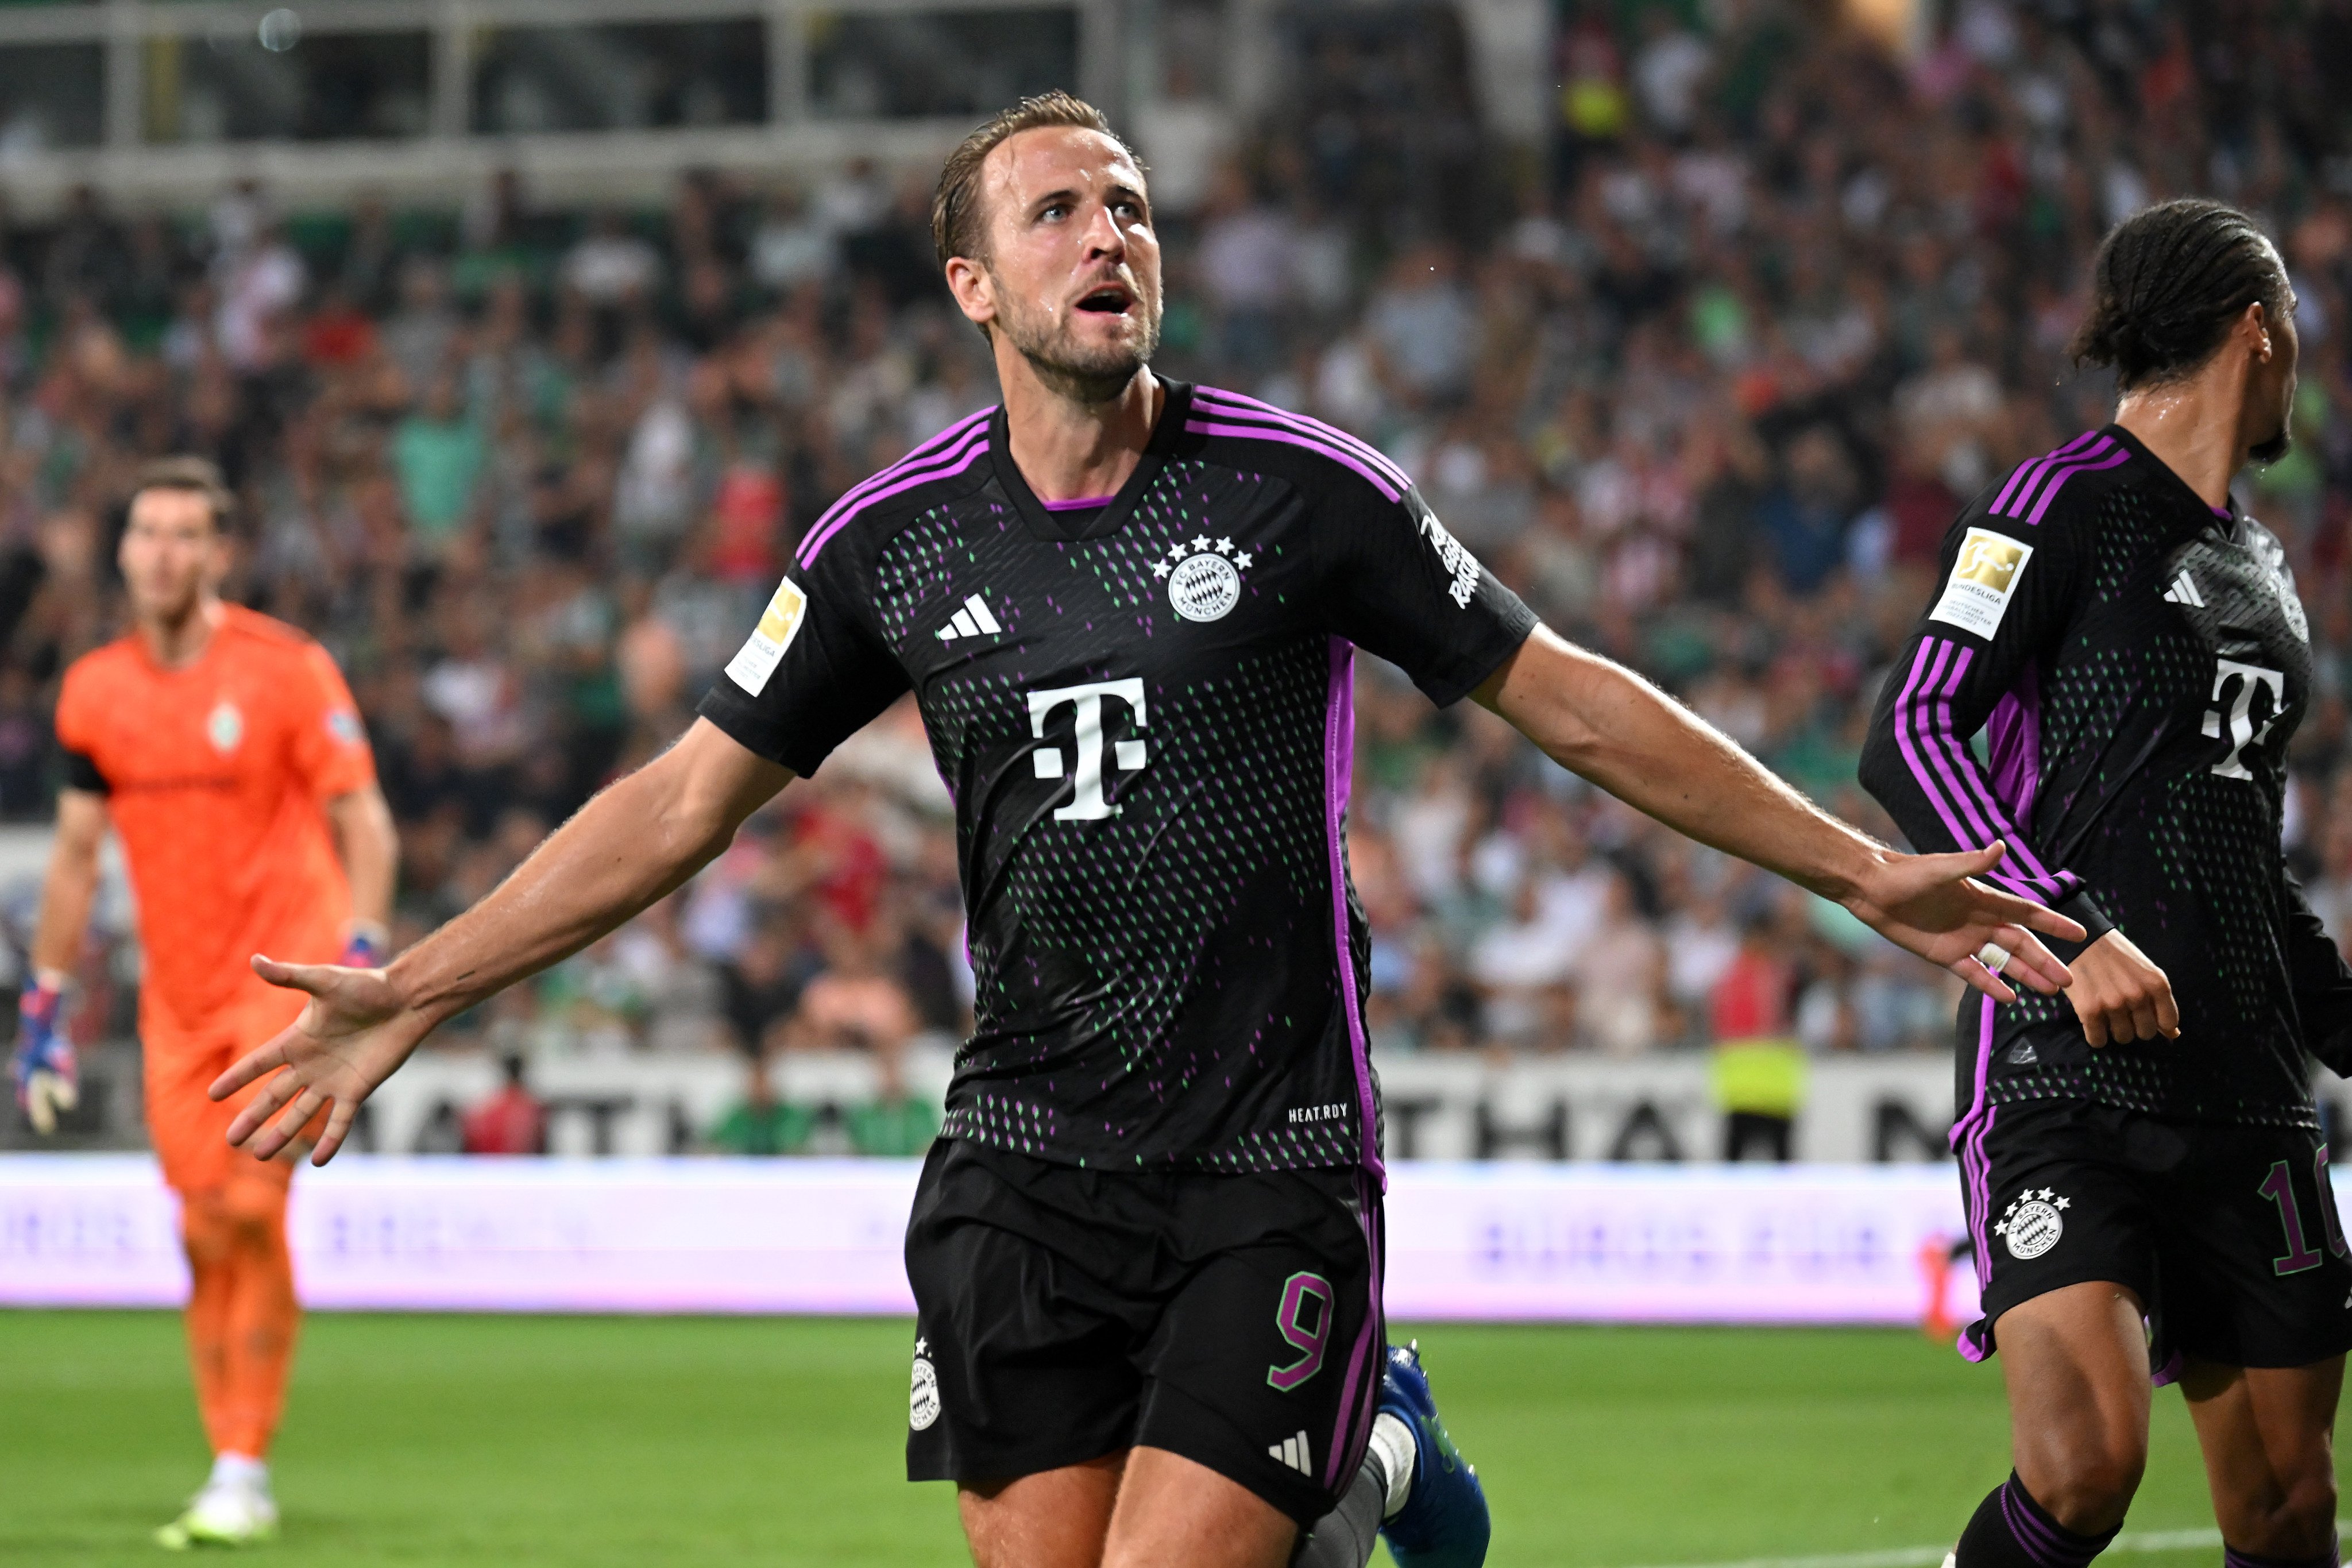 Harry Kane celebrates scoring his first league goal for Bayern Munich in his side’s 4-0 win over Werder Bremen. Photo: Xinhua